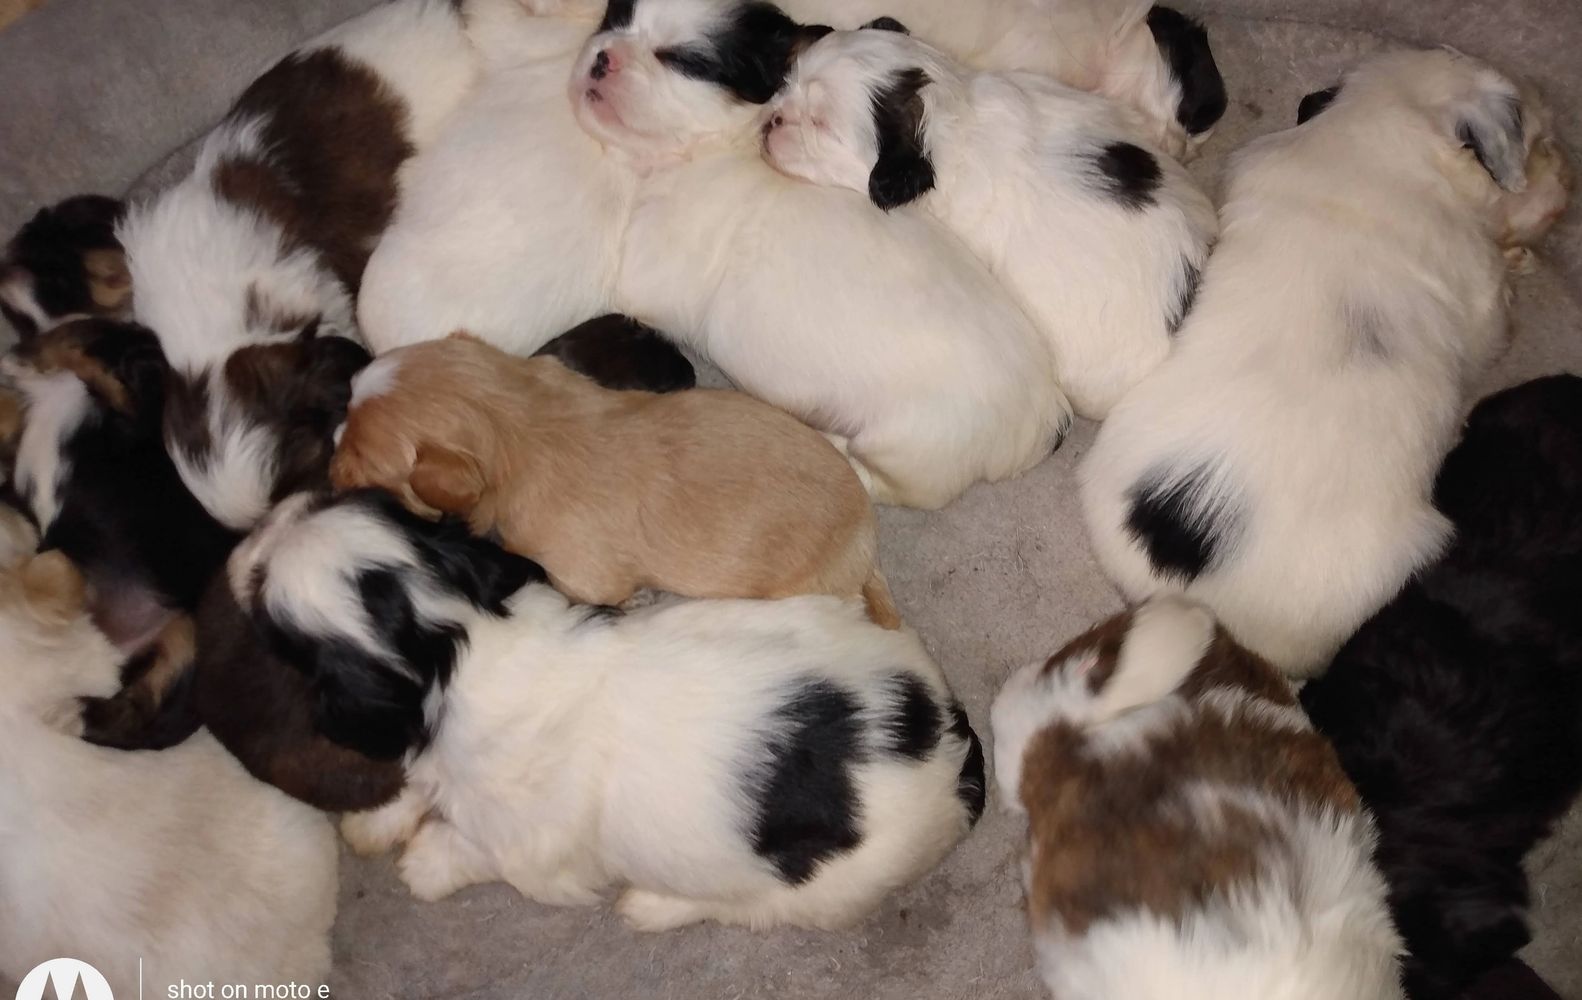 Group of Shih Tzu puppies sleeping after eating.